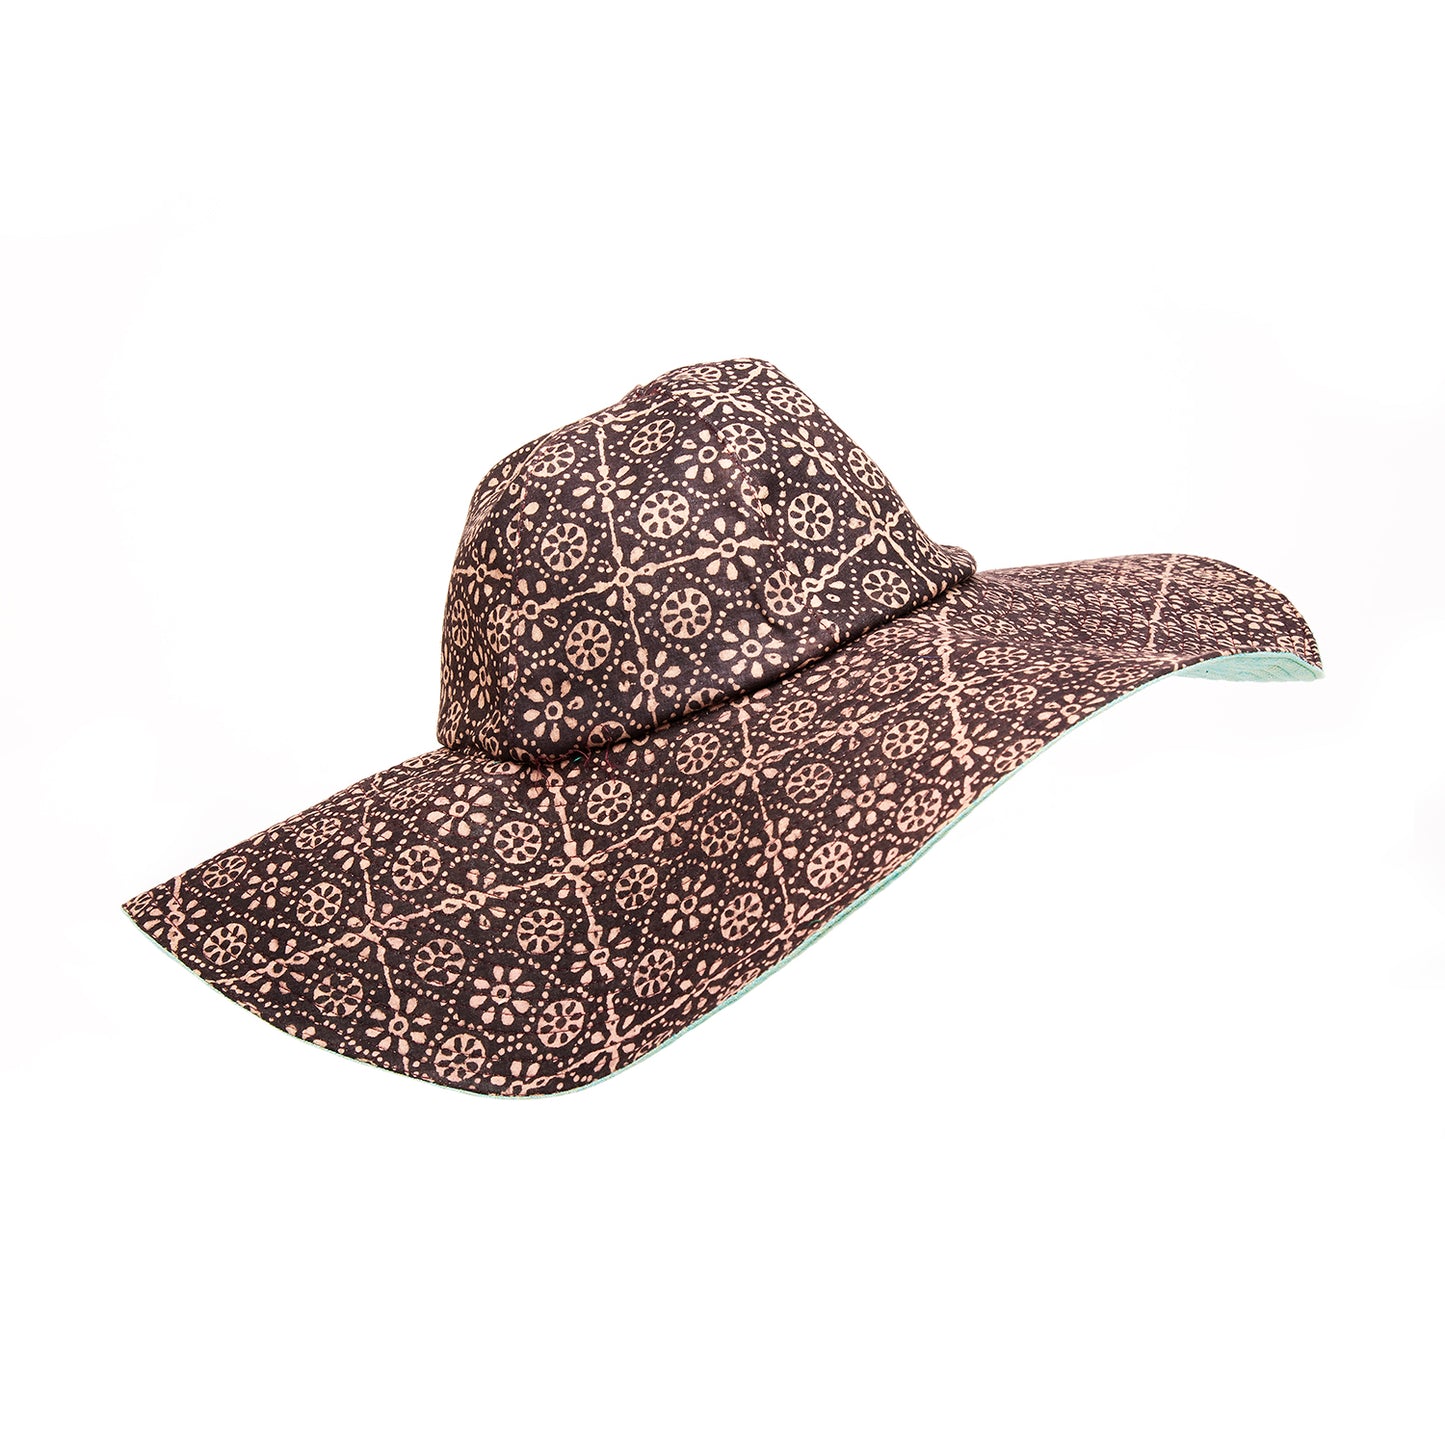 Umber Brown with Beautiful Flower design - Hat